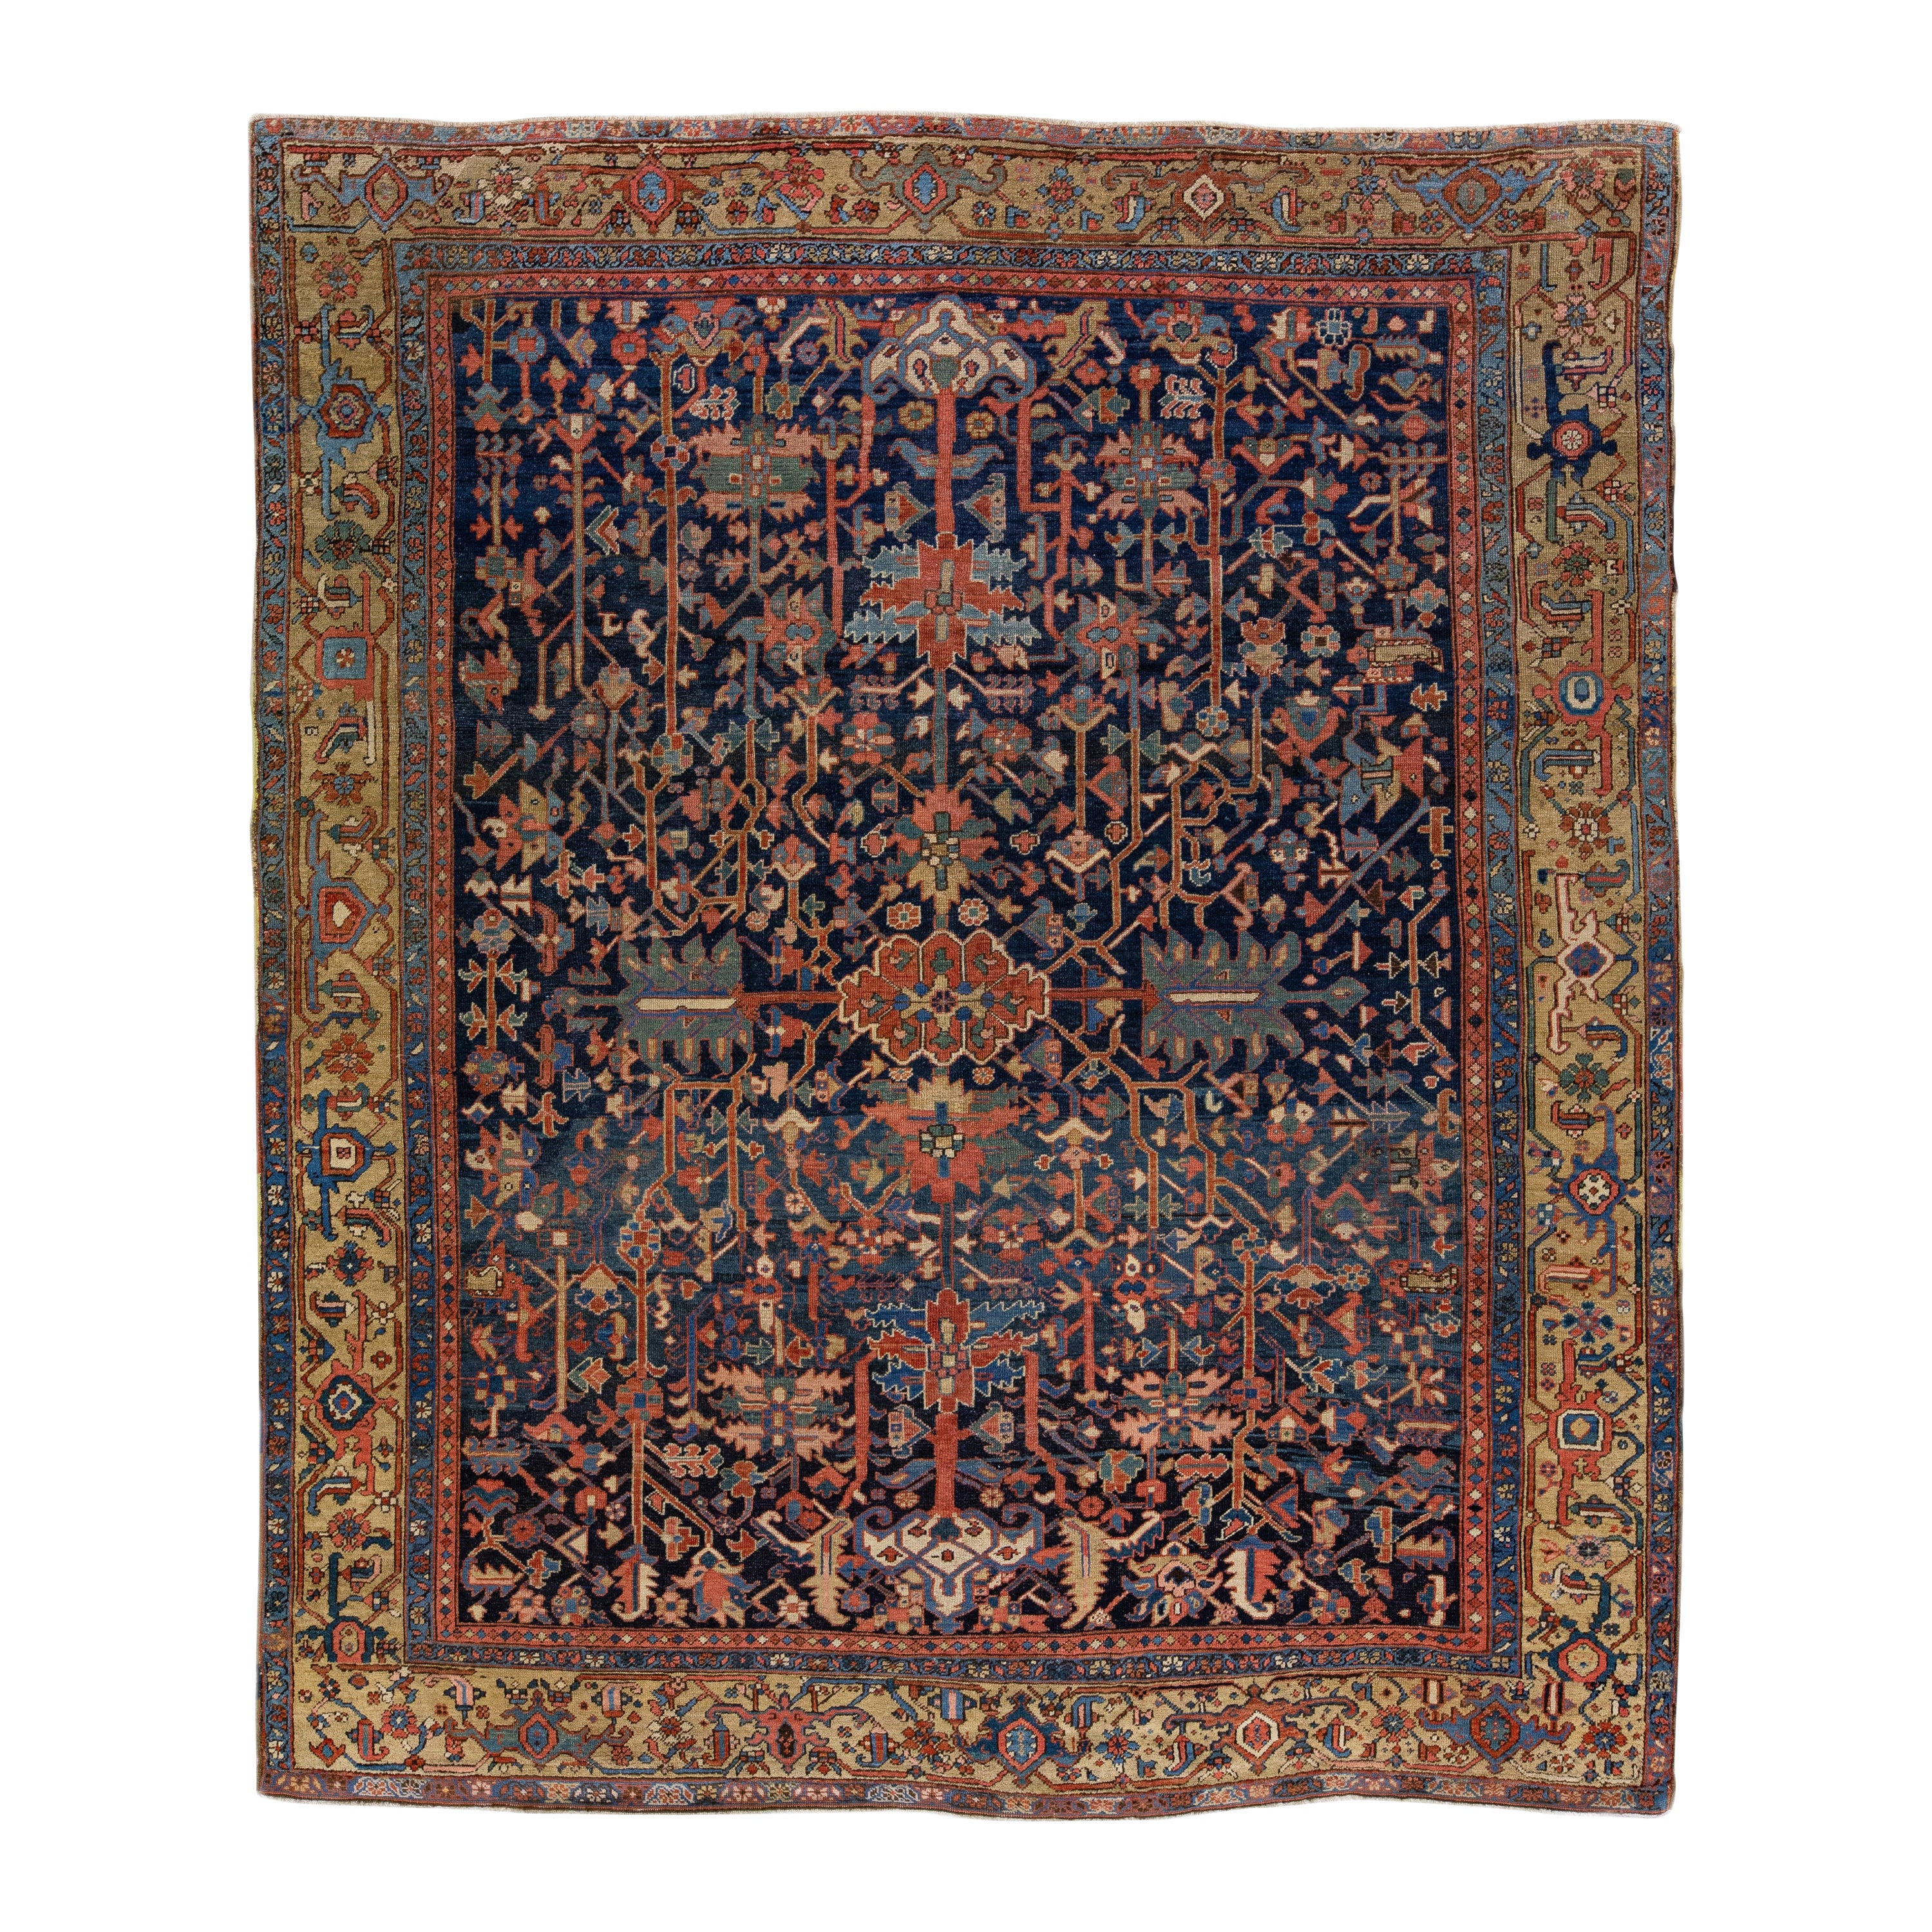 Early 20th Century Handmade Antique Blue Heriz Wool Rug with Allover Design For Sale